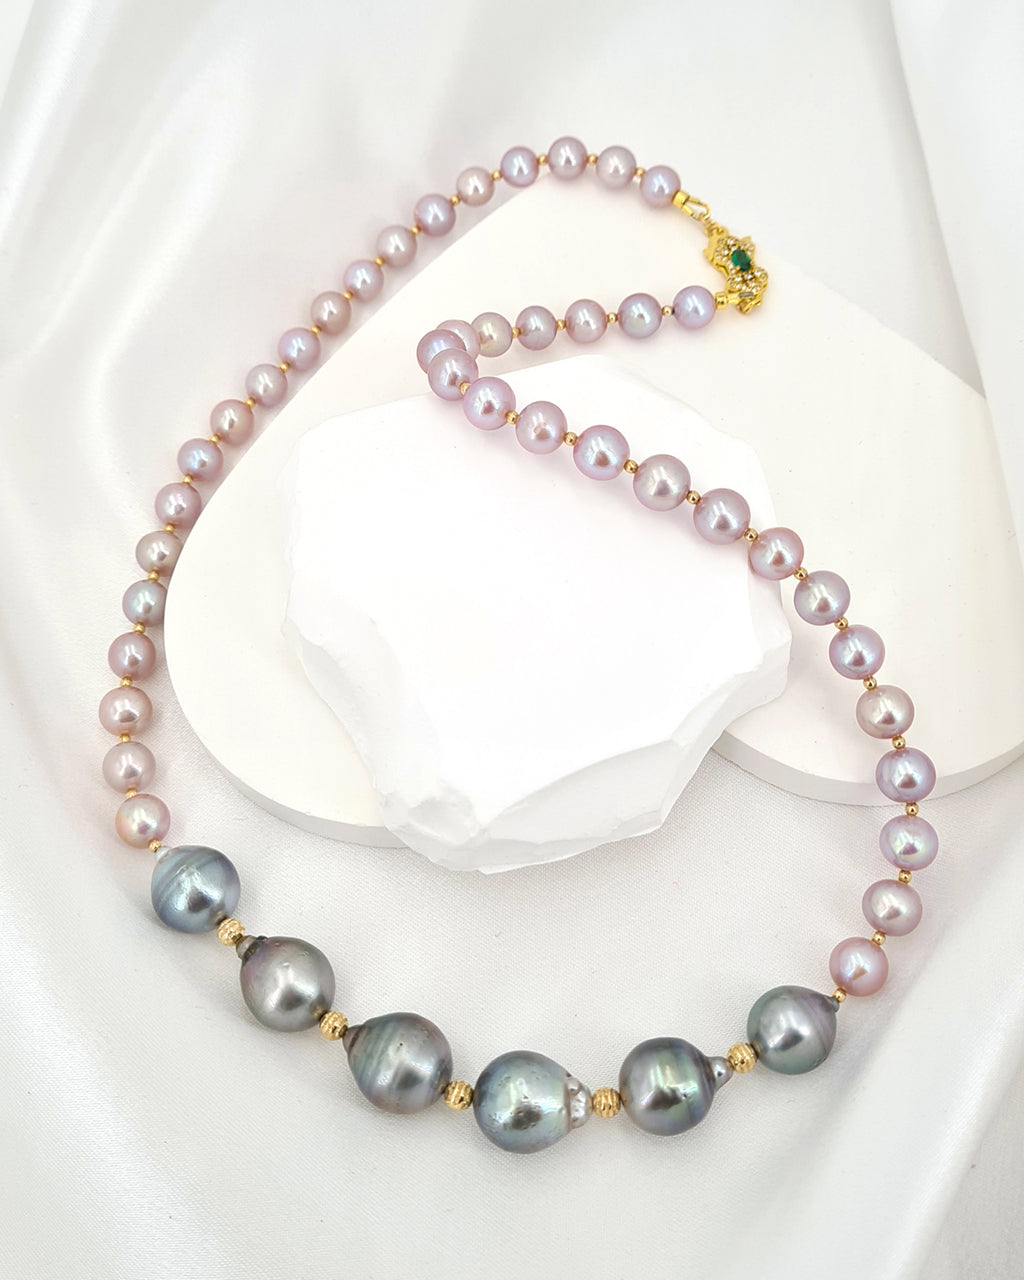 Tahitian Pearl Necklace with Grey Tahitian Pearl and Freshwater Pink Pearl | Handmade in Singapore